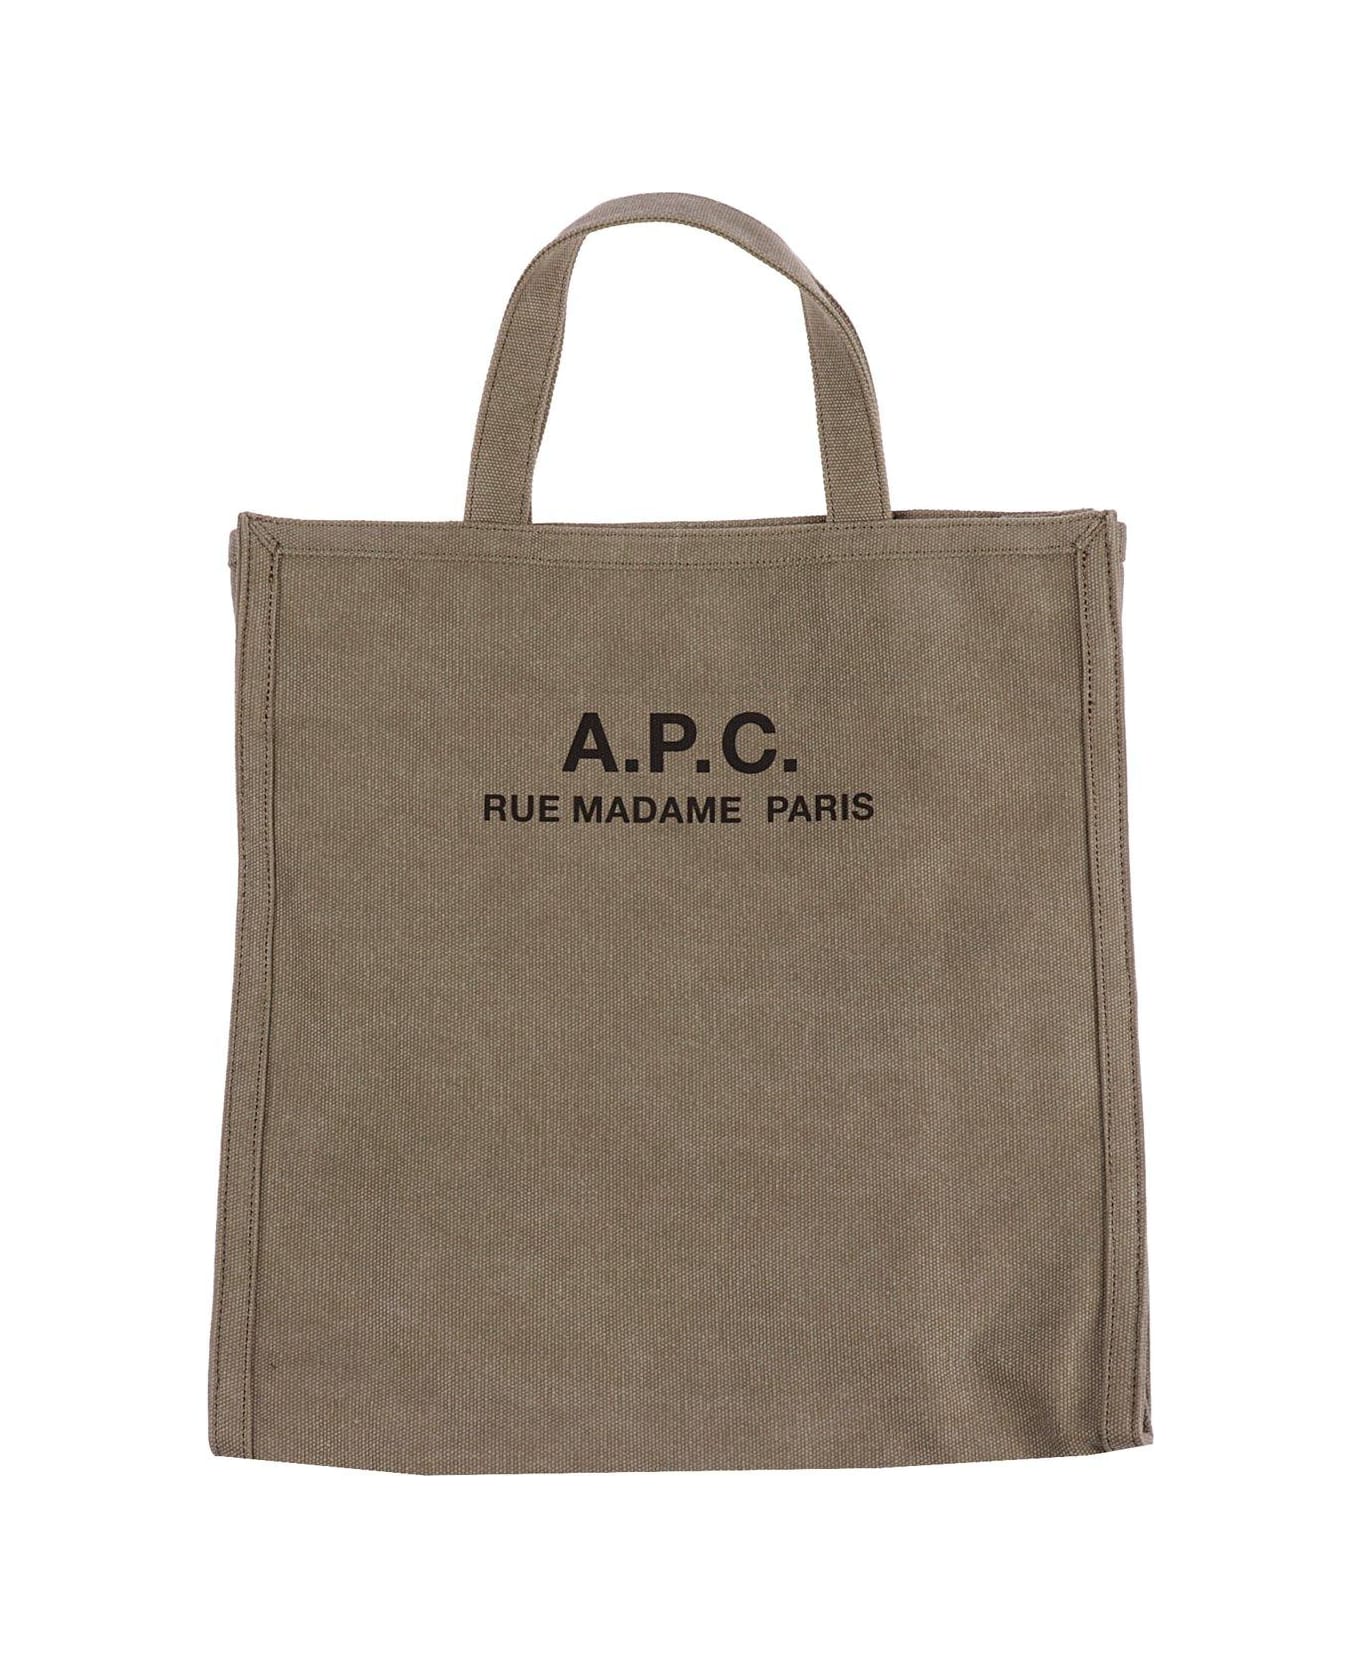 A.P.C. Recovery Shopping Tote Bag - Verde